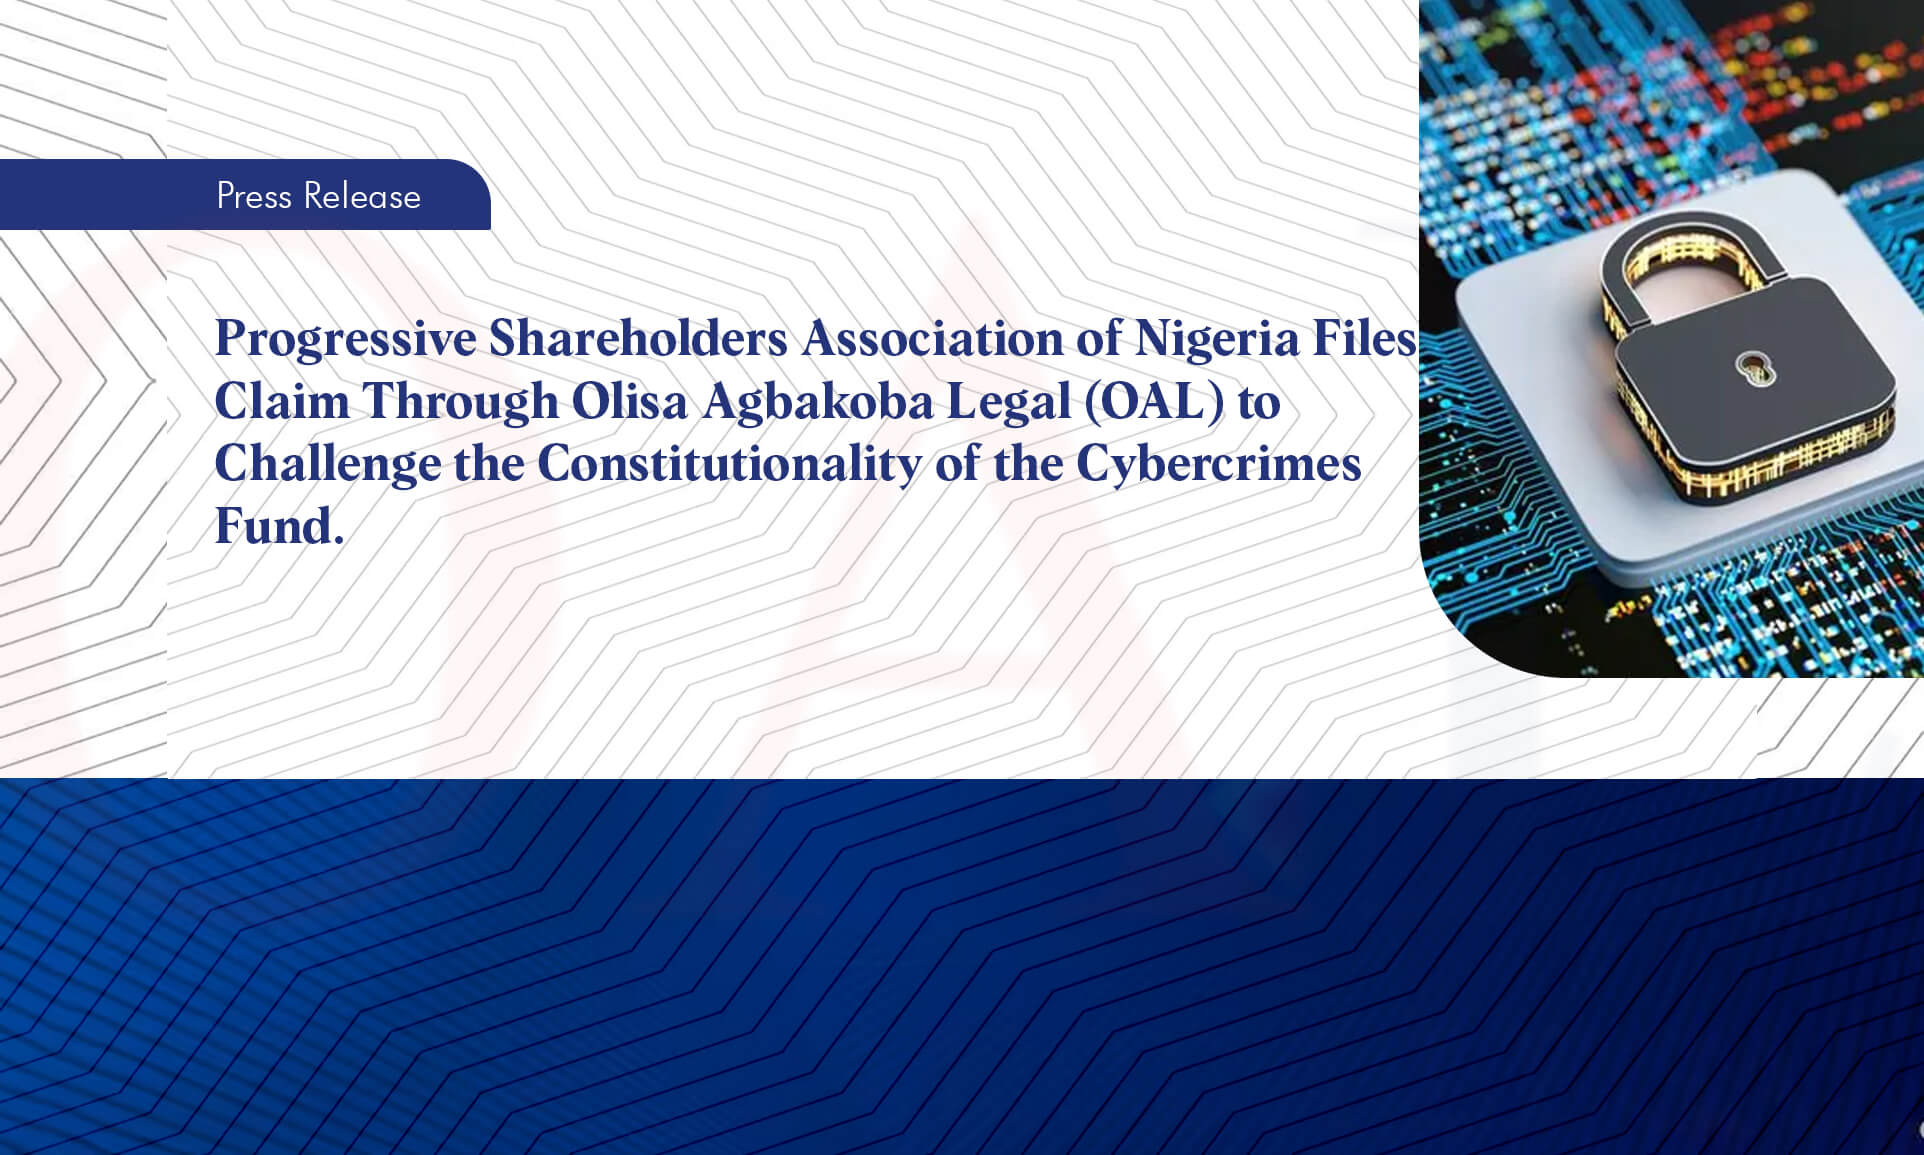 Progressive Shareholders Association of Nigeria Files Claim Through Olisa Agbakoba Legal (OAL) to Challenge the Constitutionality of the Cybercrimes Fund.